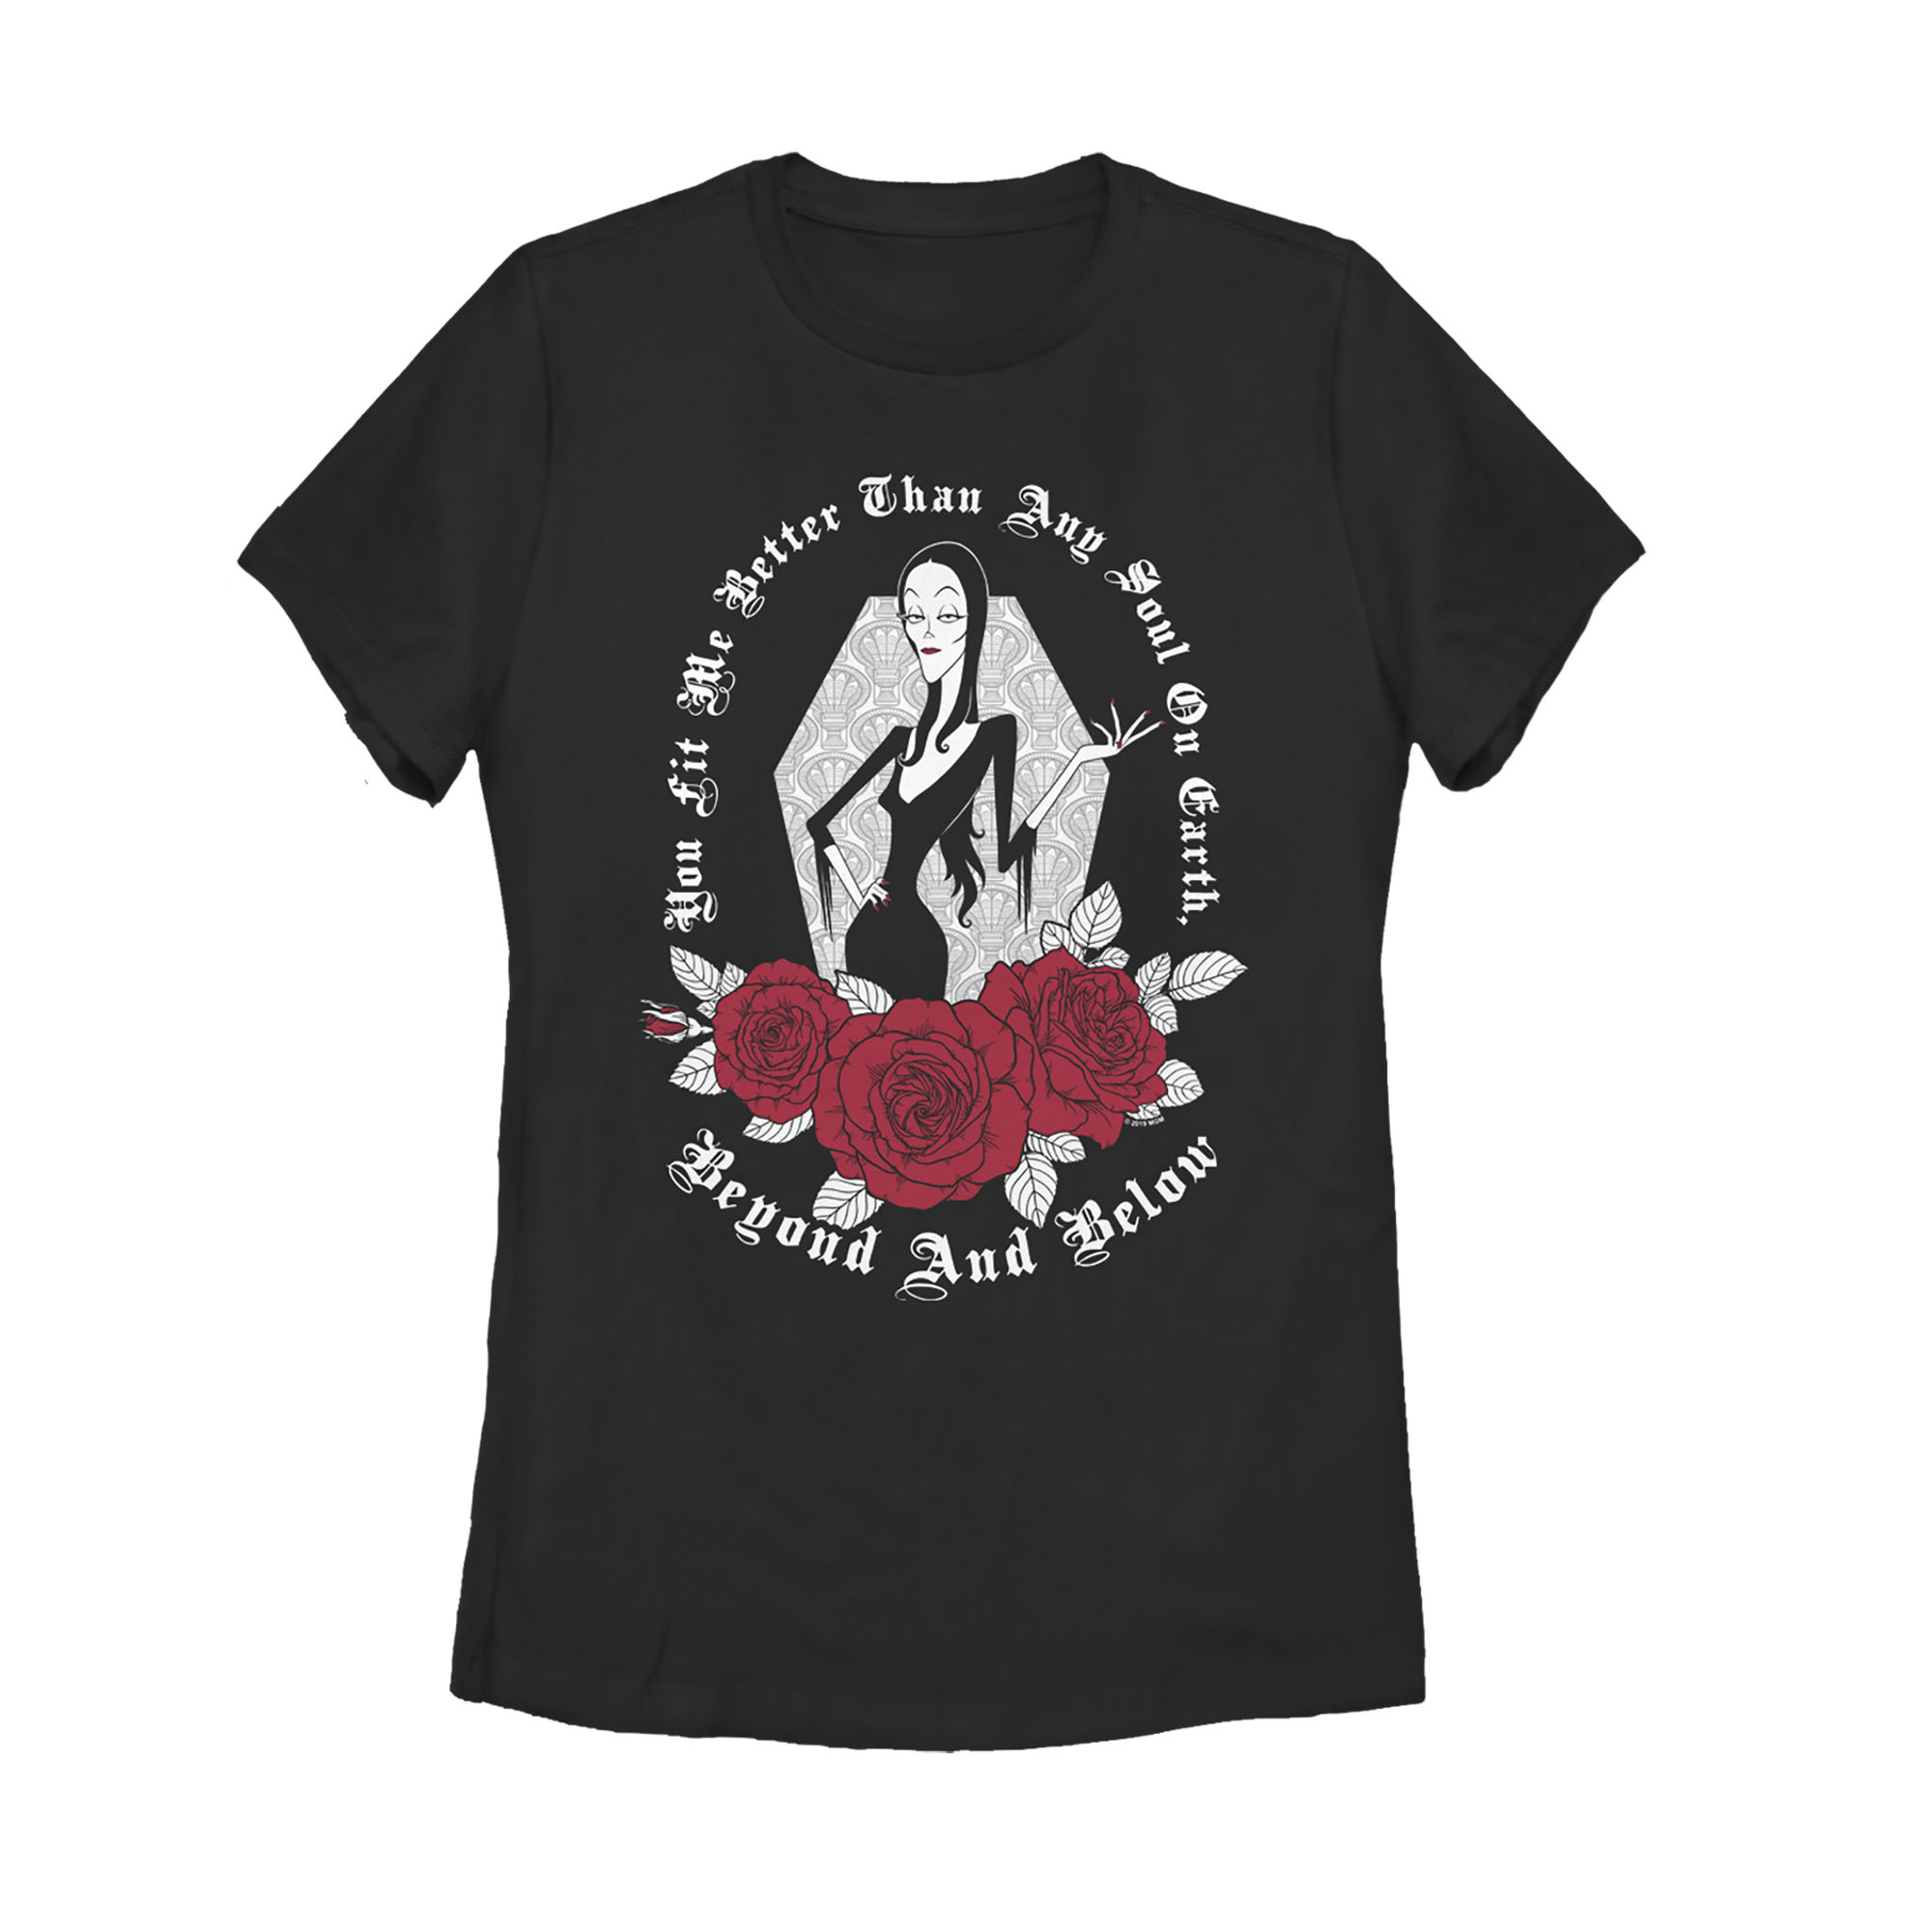 Women's Addams Family Morticia Love Declaration  Graphic Tee Black Small - image 1 of 3